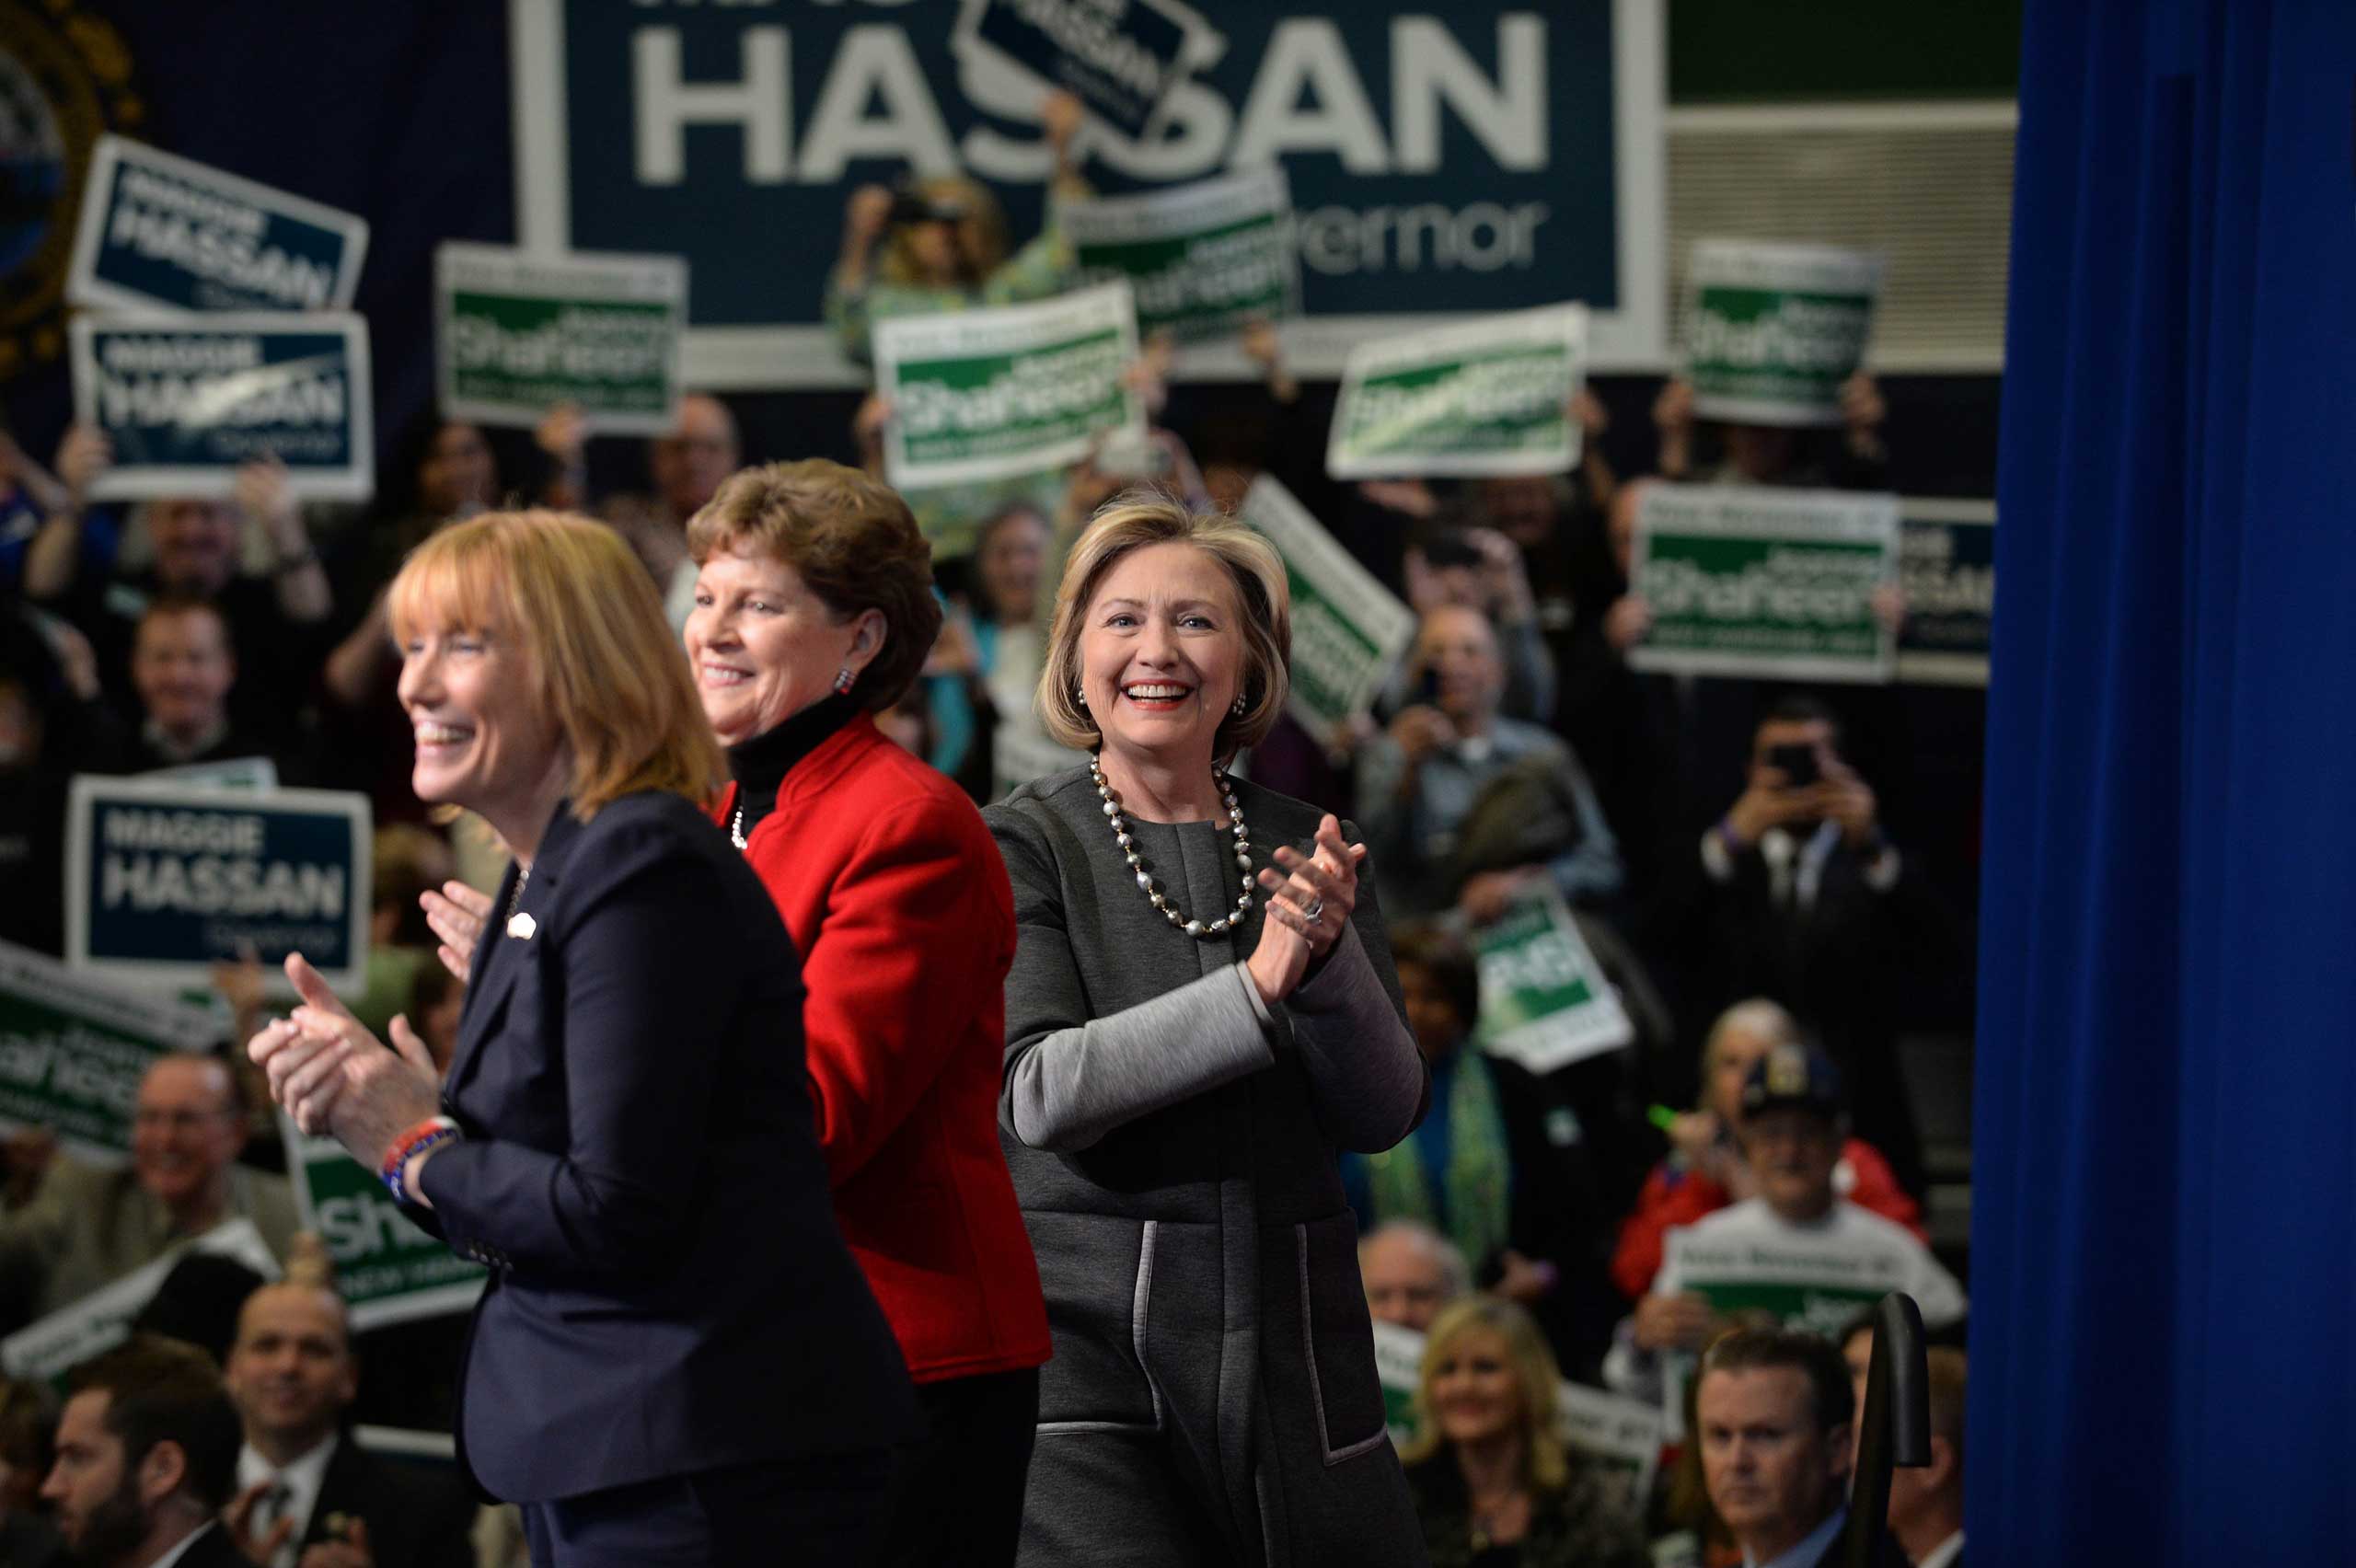 Former U.S. Secretary of State Hillary Clinton Campaigns With Jeanne Shaheen In New Hampshire